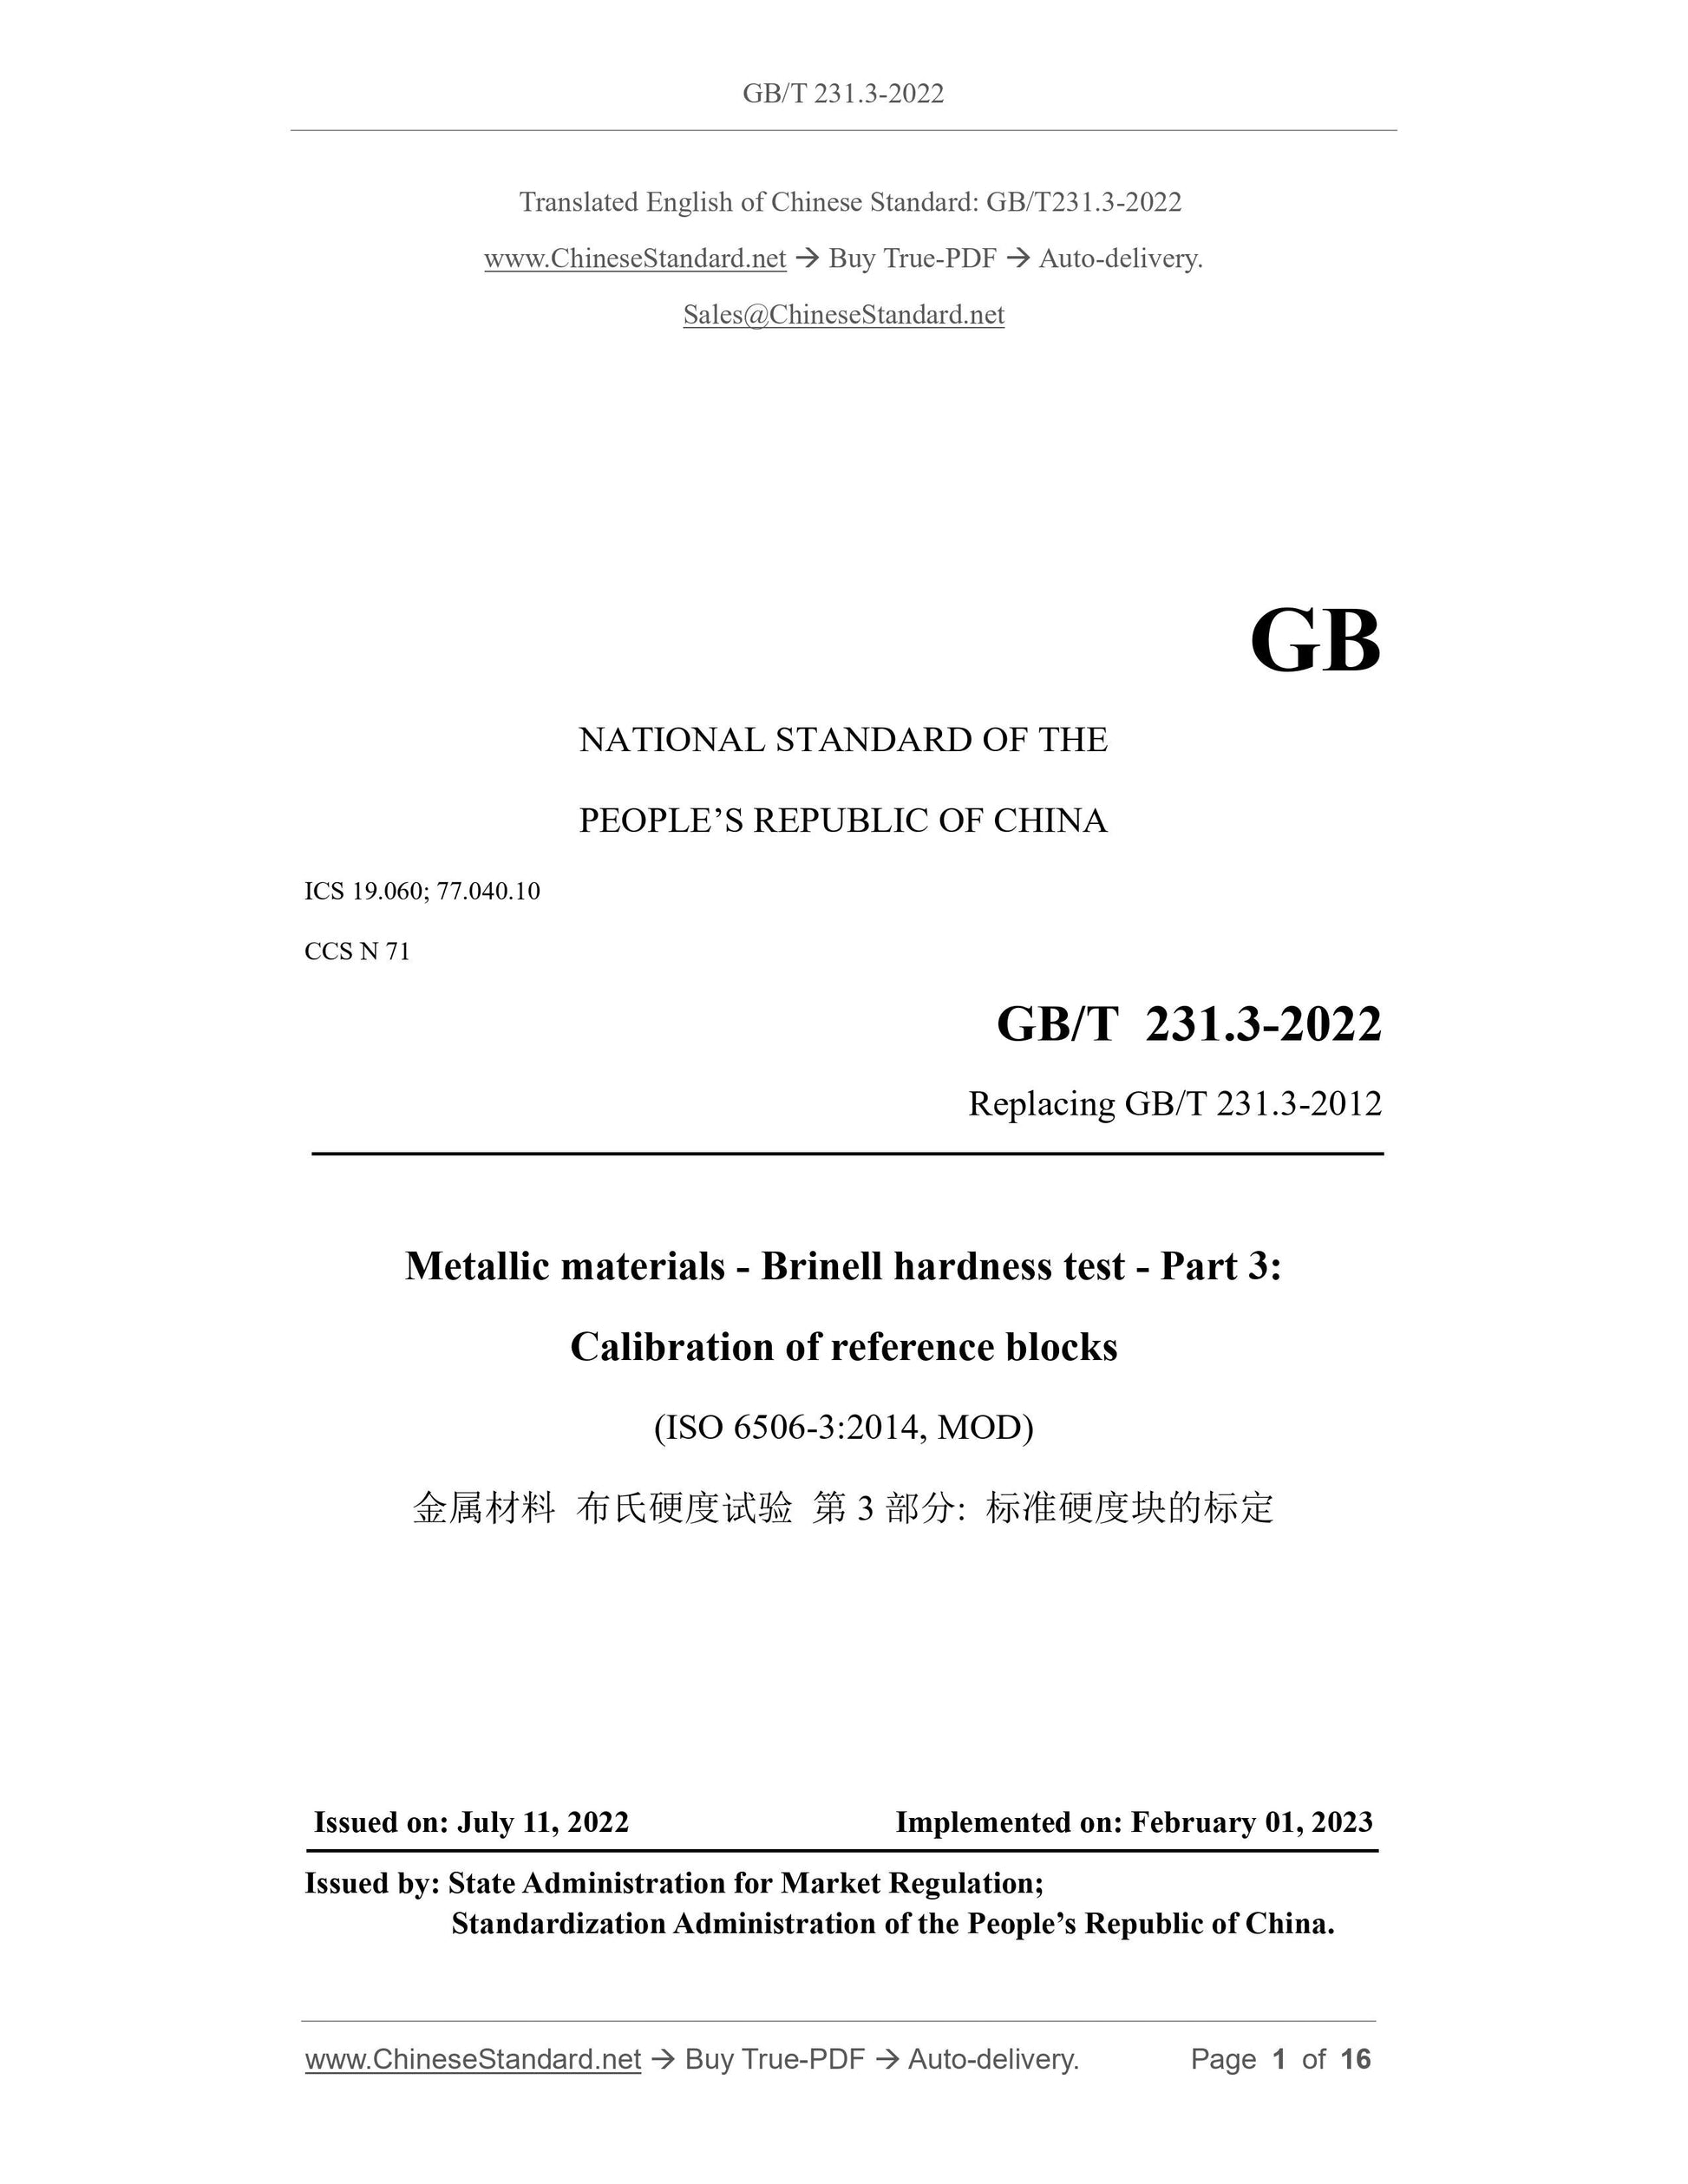 GB/T 231.3-2022 Page 1